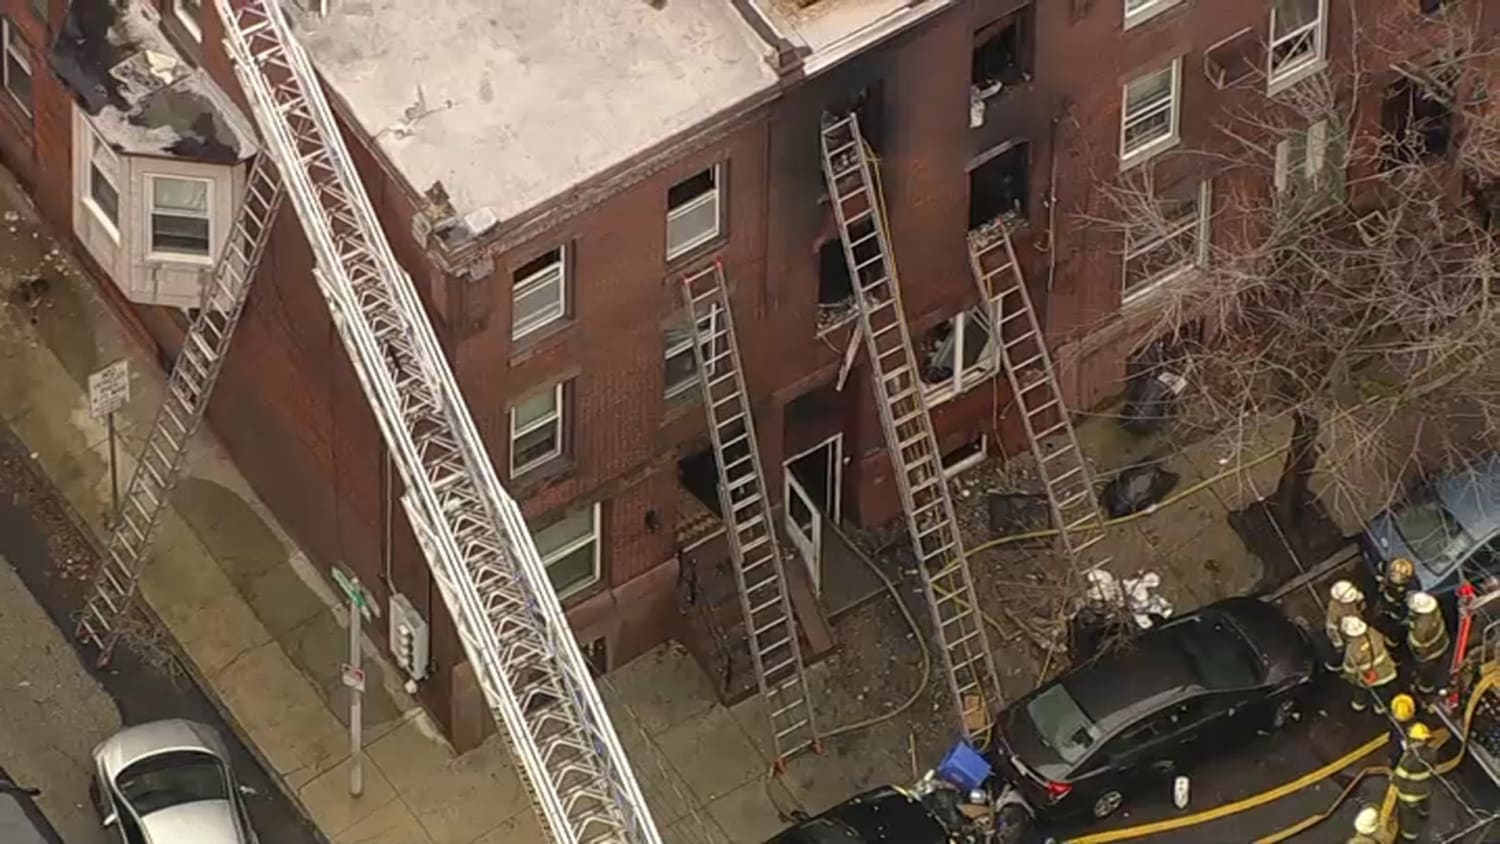 13 killed, two others injured in fire at Philadelphia rowhouse, police say